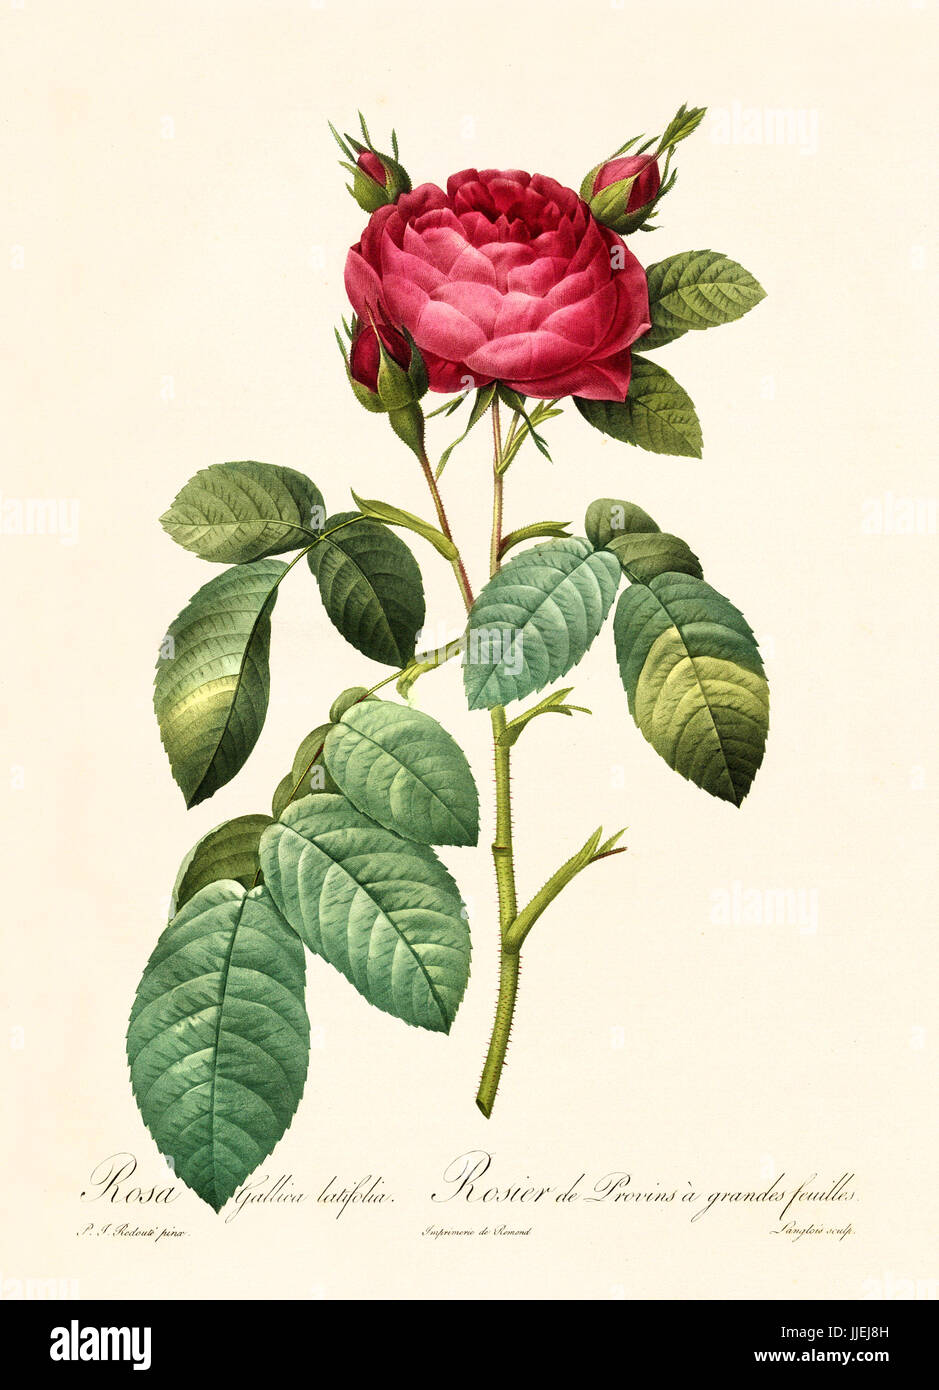 Old illustration of Rosa gallica latifolia. Created by P. R. Redoute, published on Les Roses, Imp. Firmin Didot, Paris, 1817-24 Stock Photo